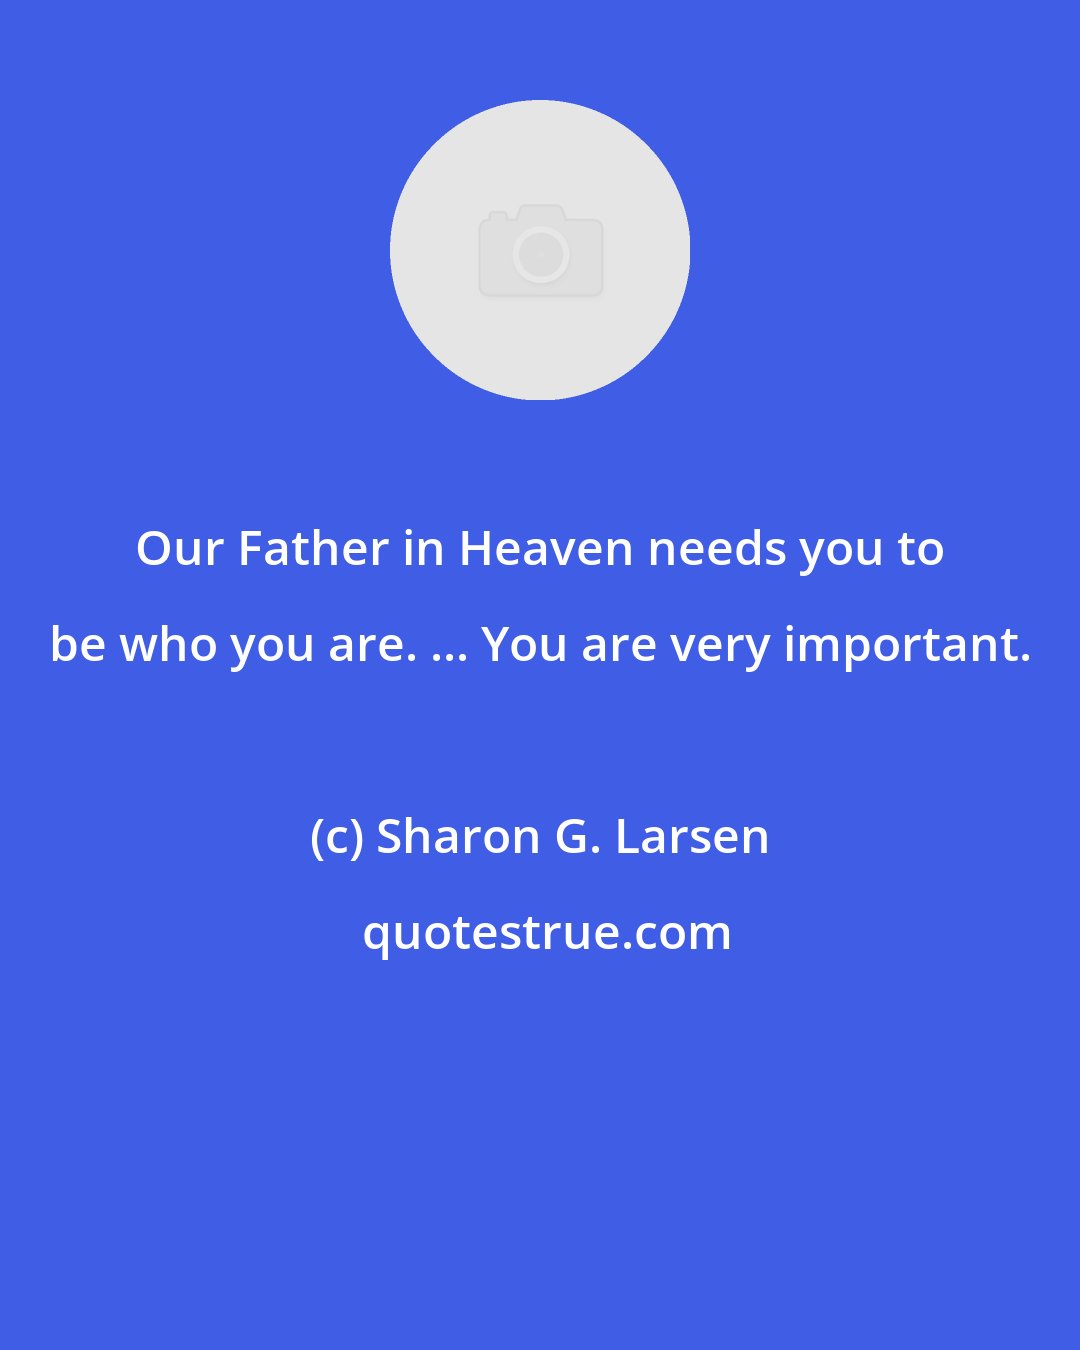 Sharon G. Larsen: Our Father in Heaven needs you to be who you are. ... You are very important.